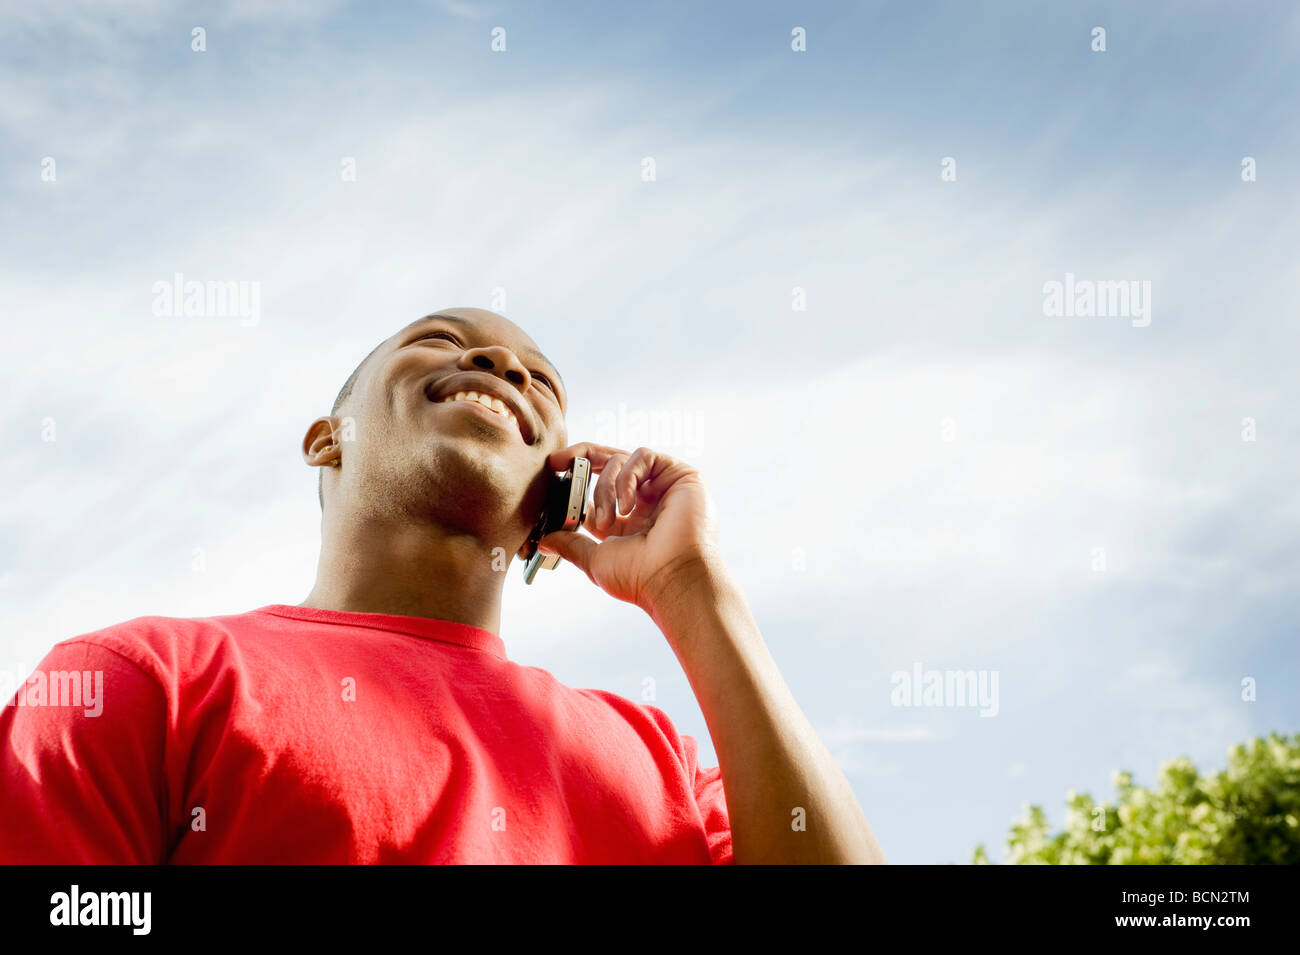 A young man on a cellular phone, shot from below Stock Photo